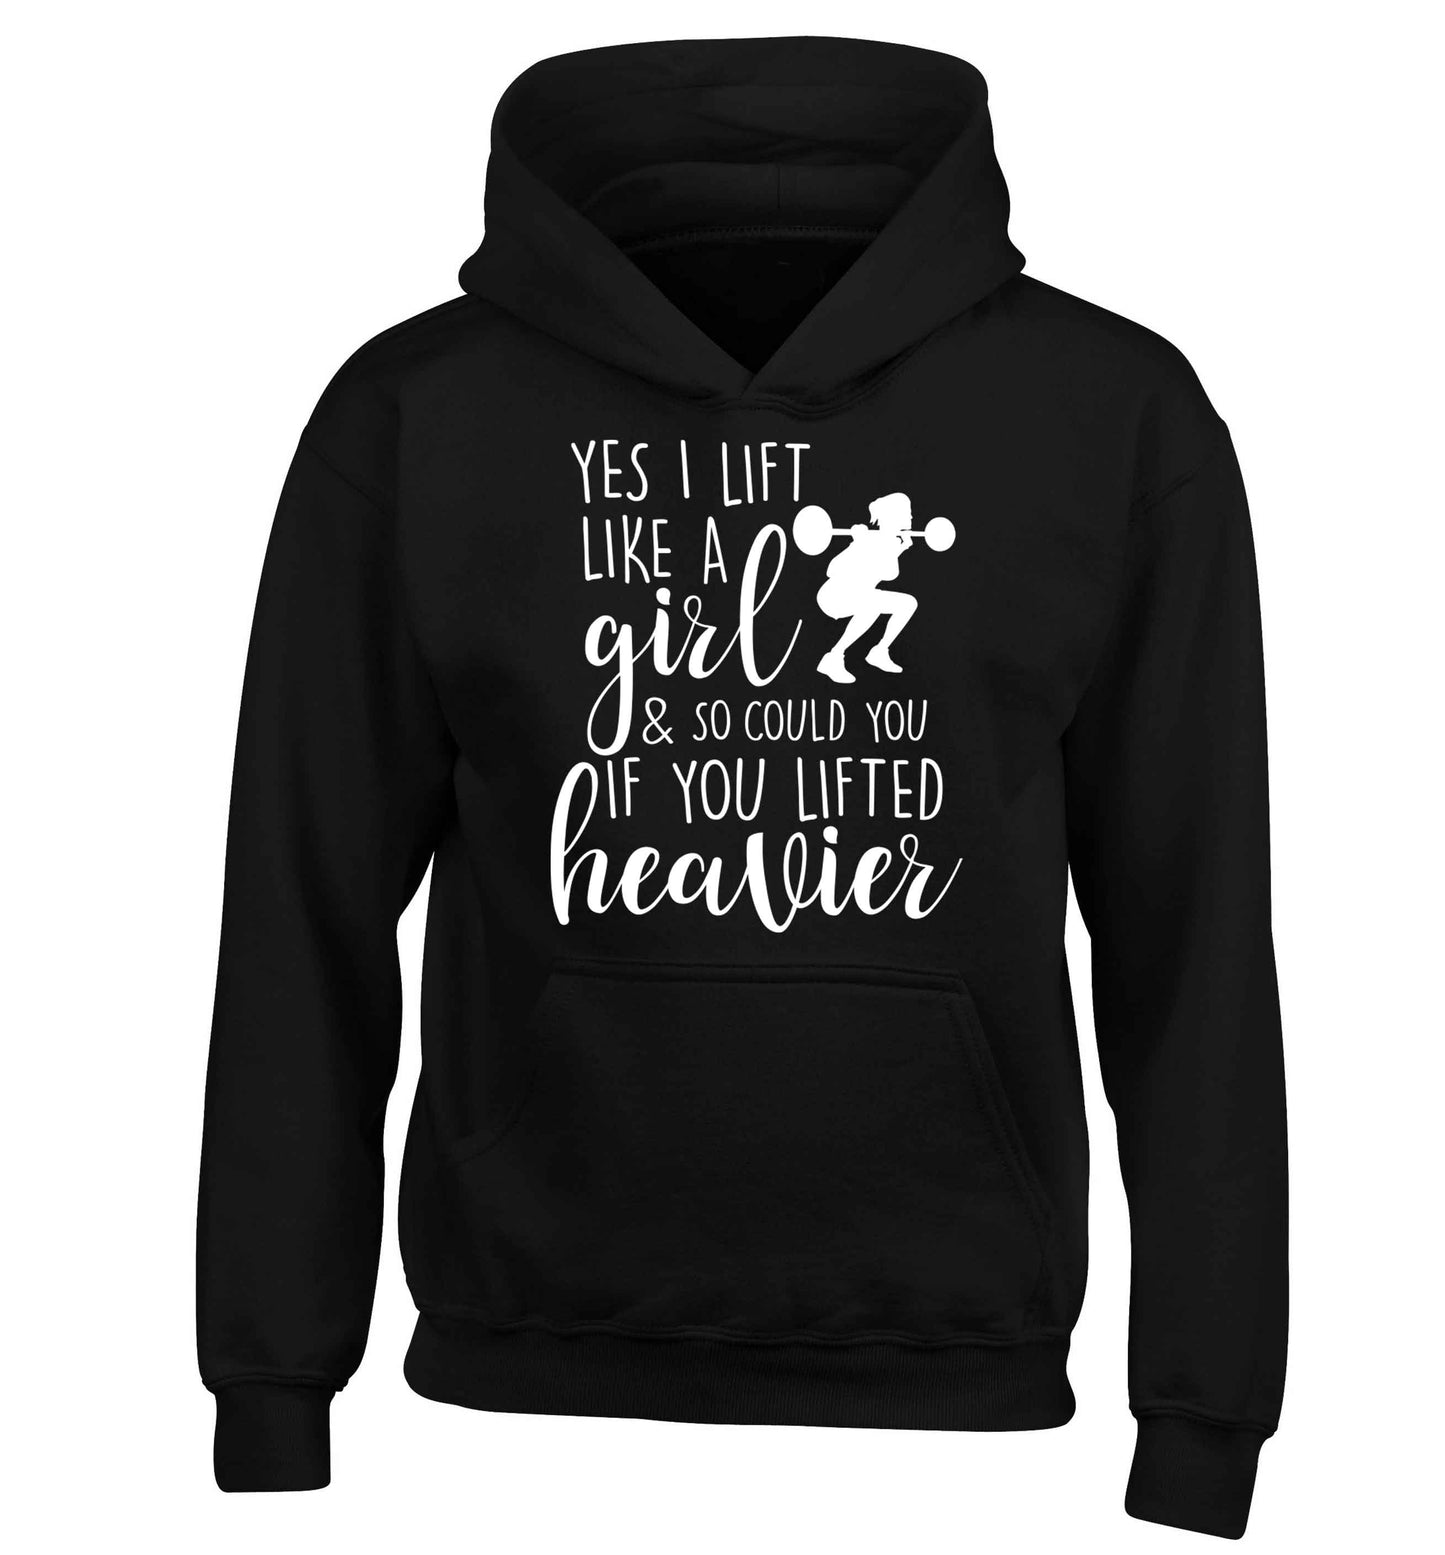 Yes I lift like a girl and so could you if you lifted heavier children's black hoodie 12-13 Years